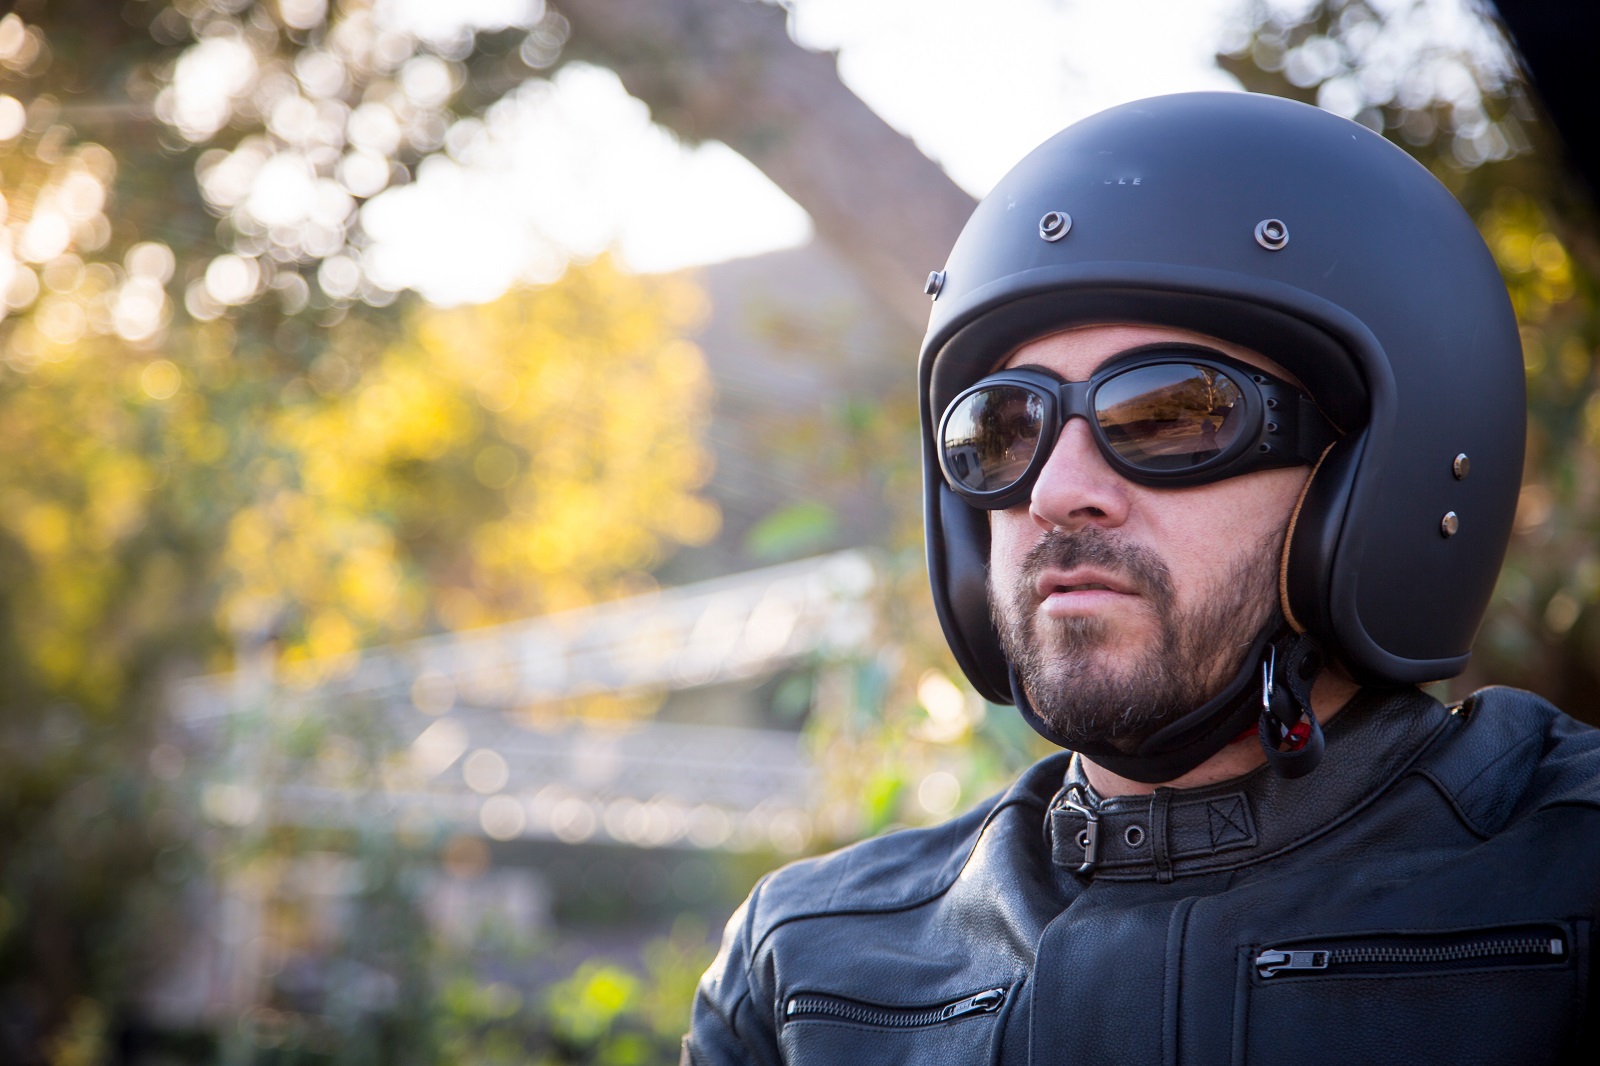 <p class="wp-caption-text">Image Credit: Shutterstock / F Armstrong Photography</p>  <p><span>Eye protection is vital if your helmet does not have a visor. Goggles or safety glasses prevent debris, insects, and wind from impairing your vision while riding.</span></p>